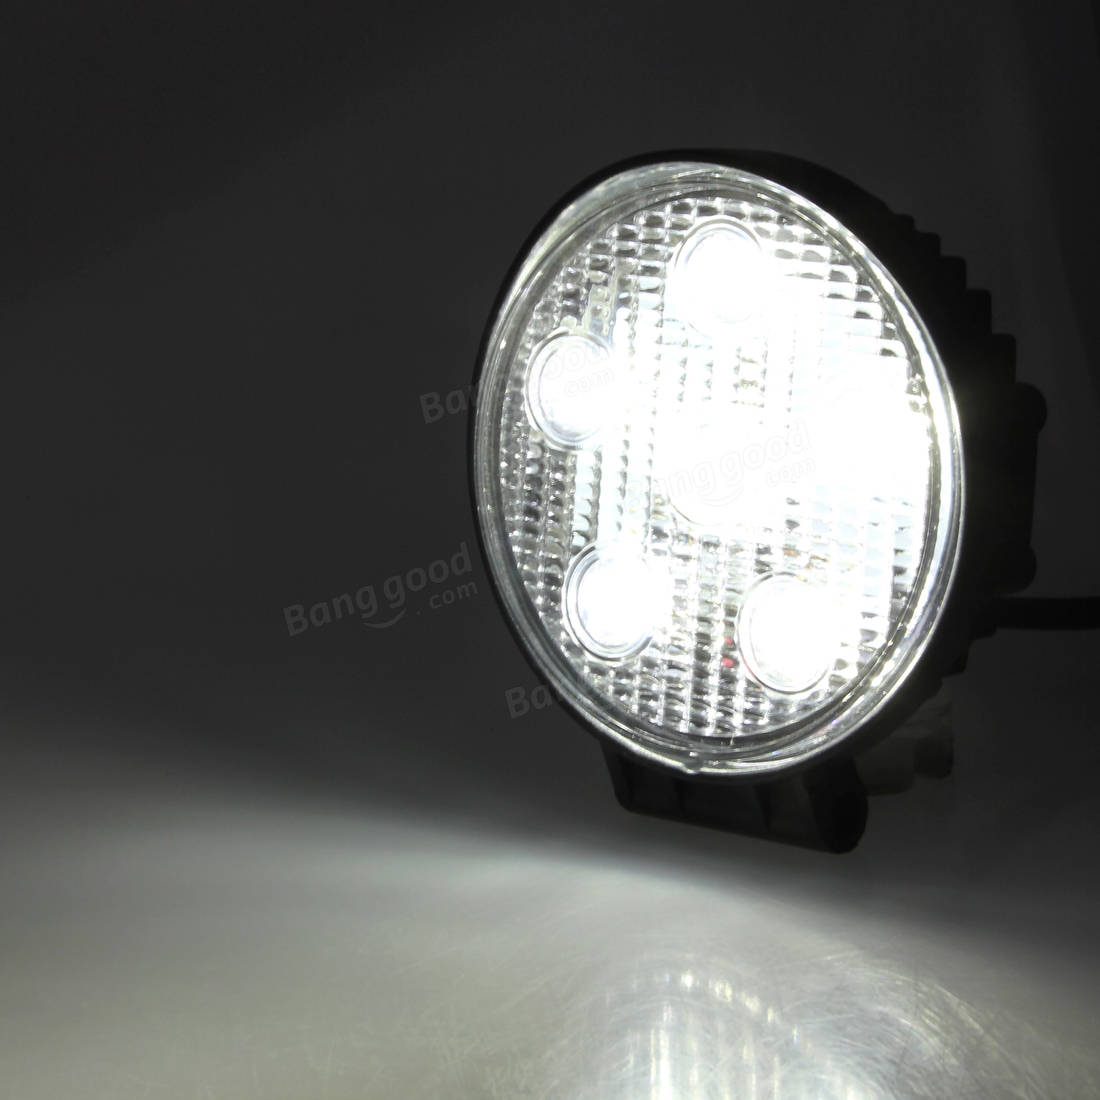 18W-6LED-Round-Work-Light-Spot-Beam-Off-Road-Work-Light-for-Truck-4WD-4x4-909478